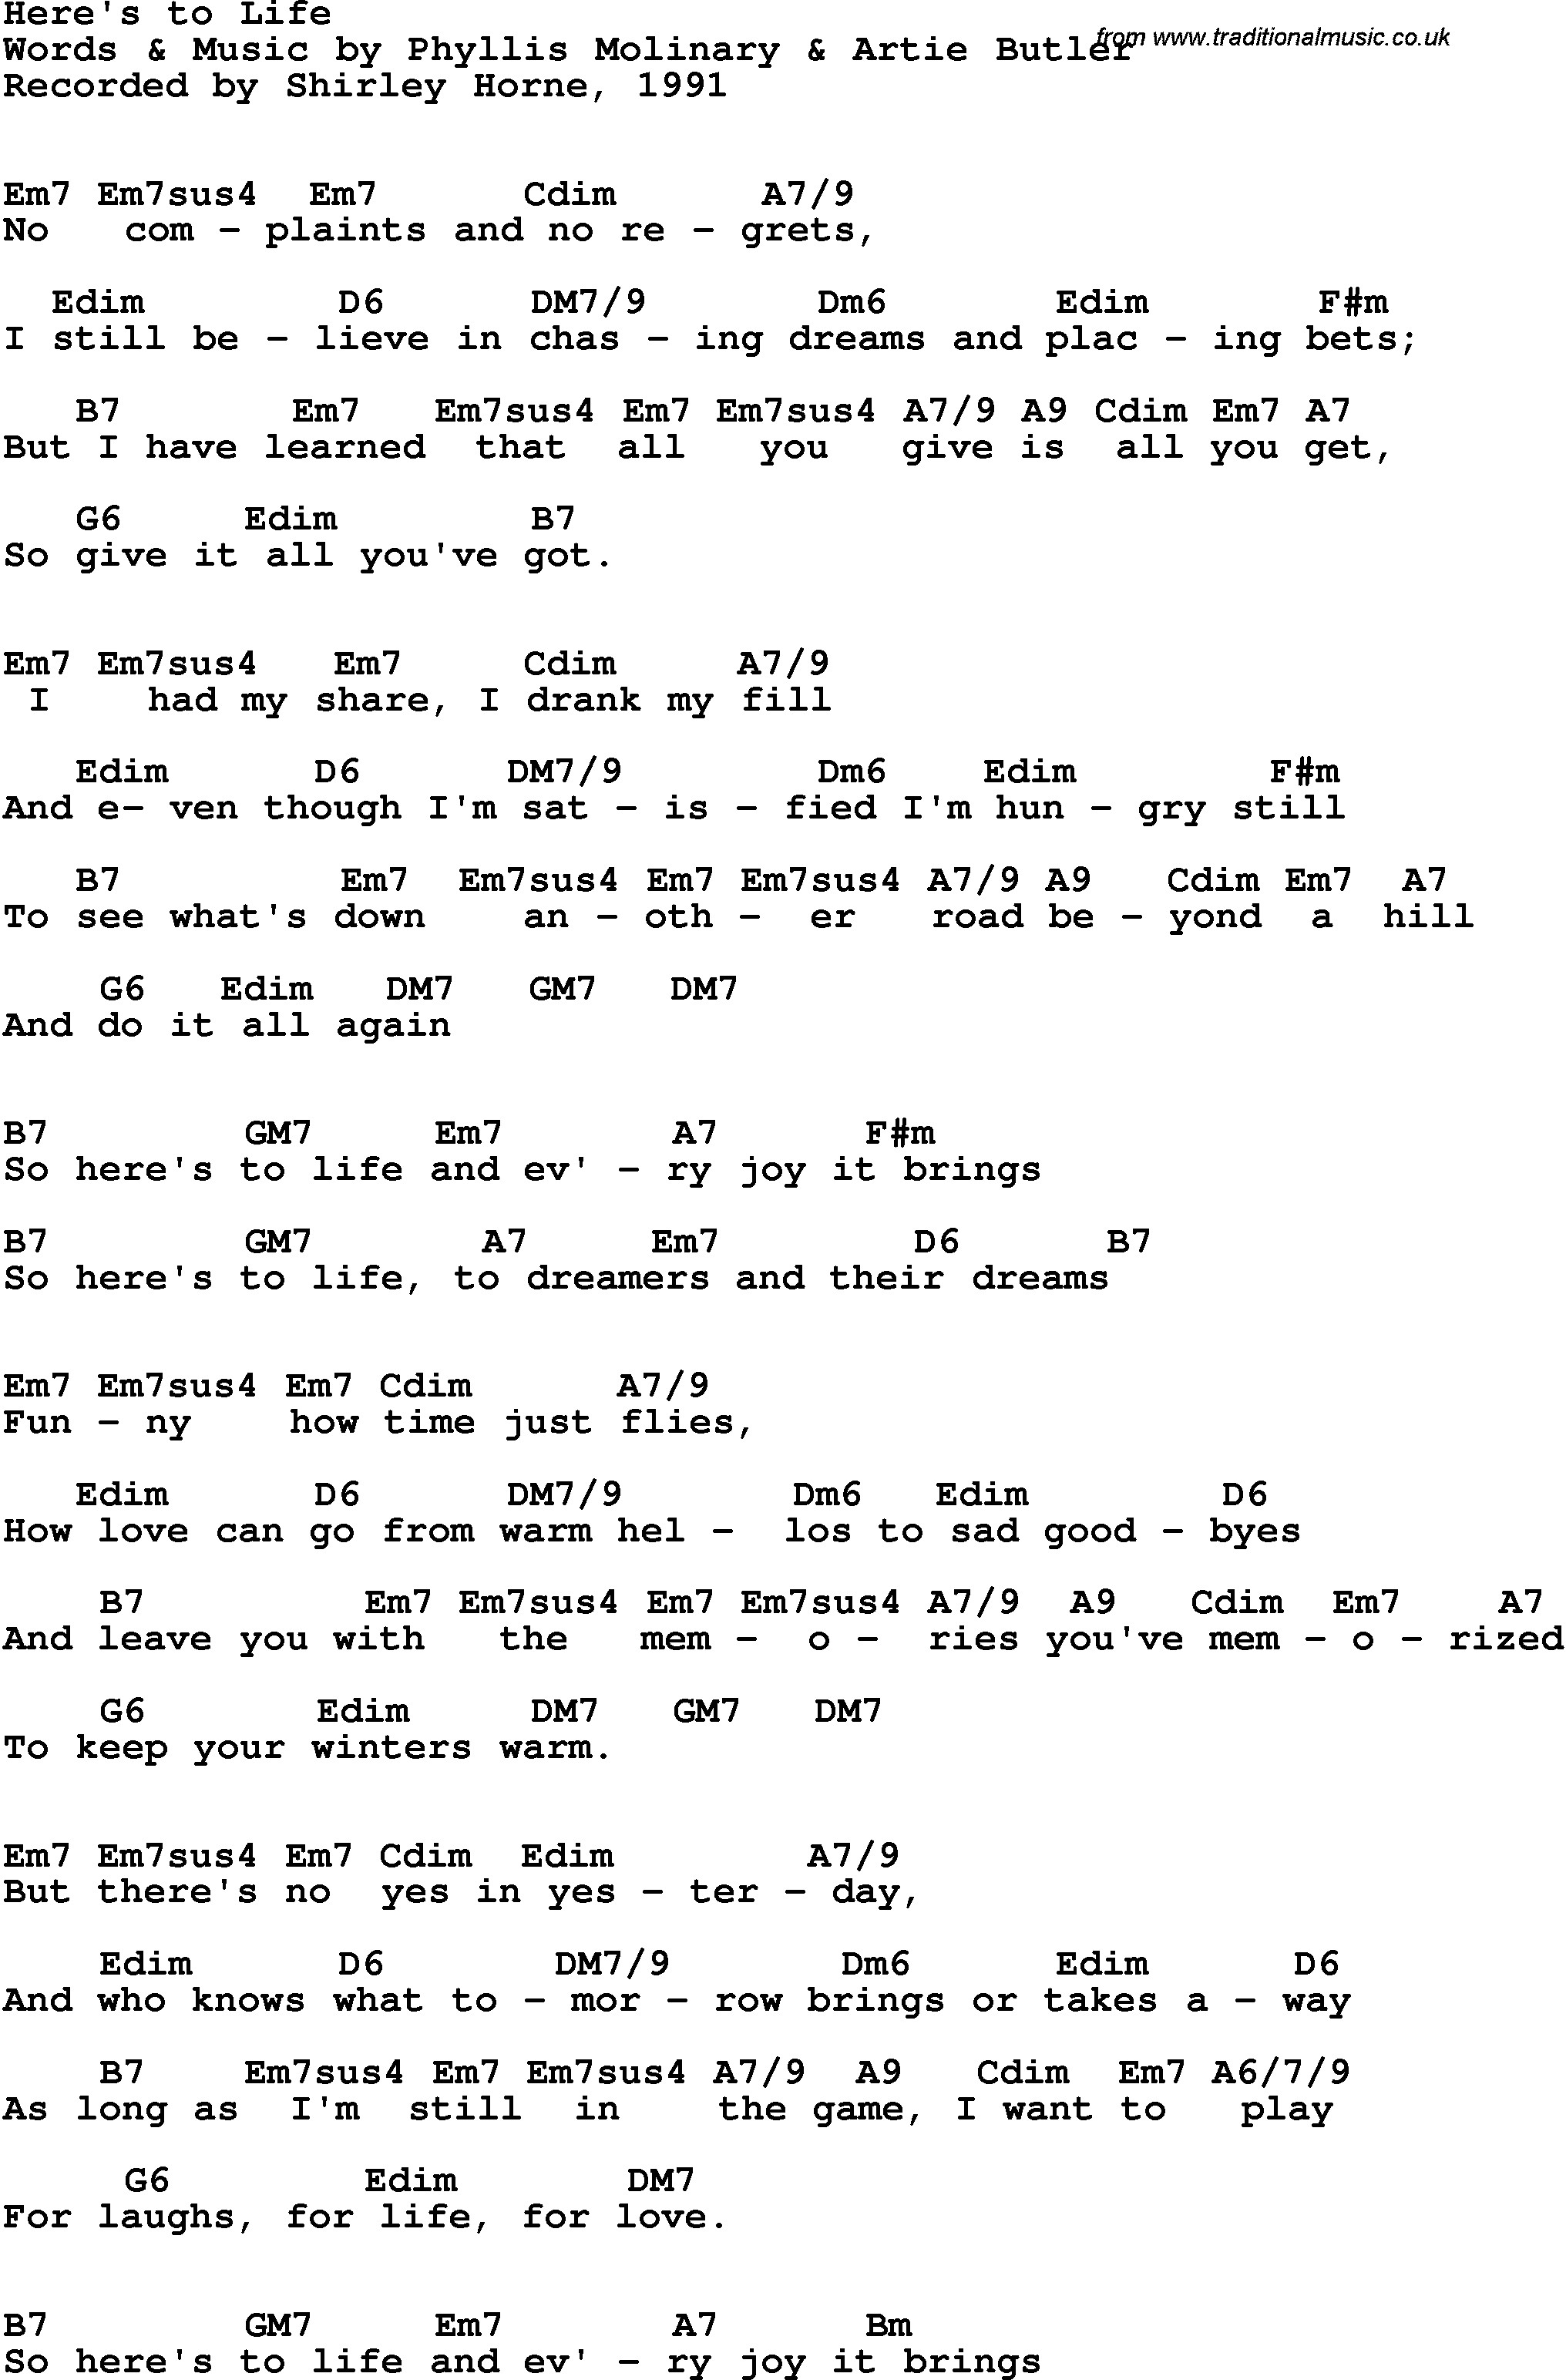 Song Lyrics with guitar chords for Here's To Life - Shirley Horne, 1991